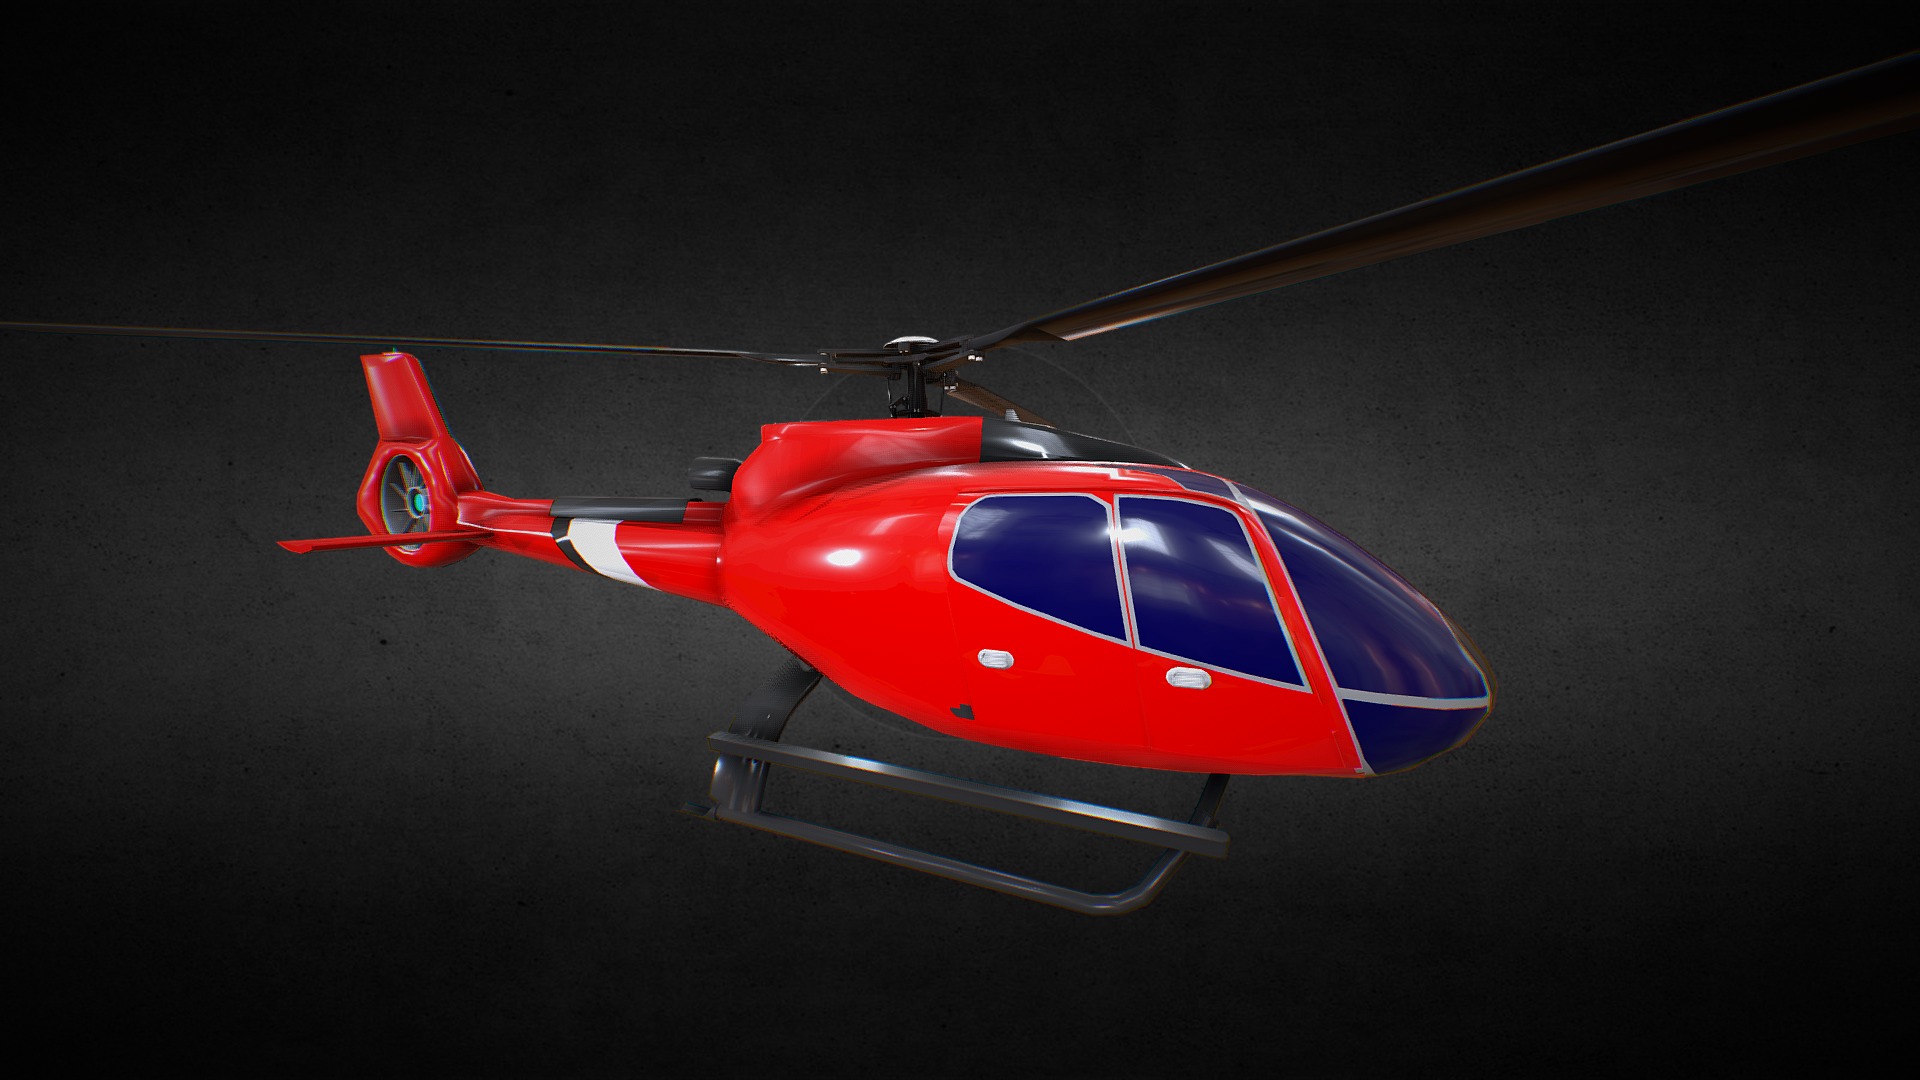 3D model Helicopter is animated - This is a 3D model of the Helicopter is animated. The 3D model is about a red and blue helicopter.